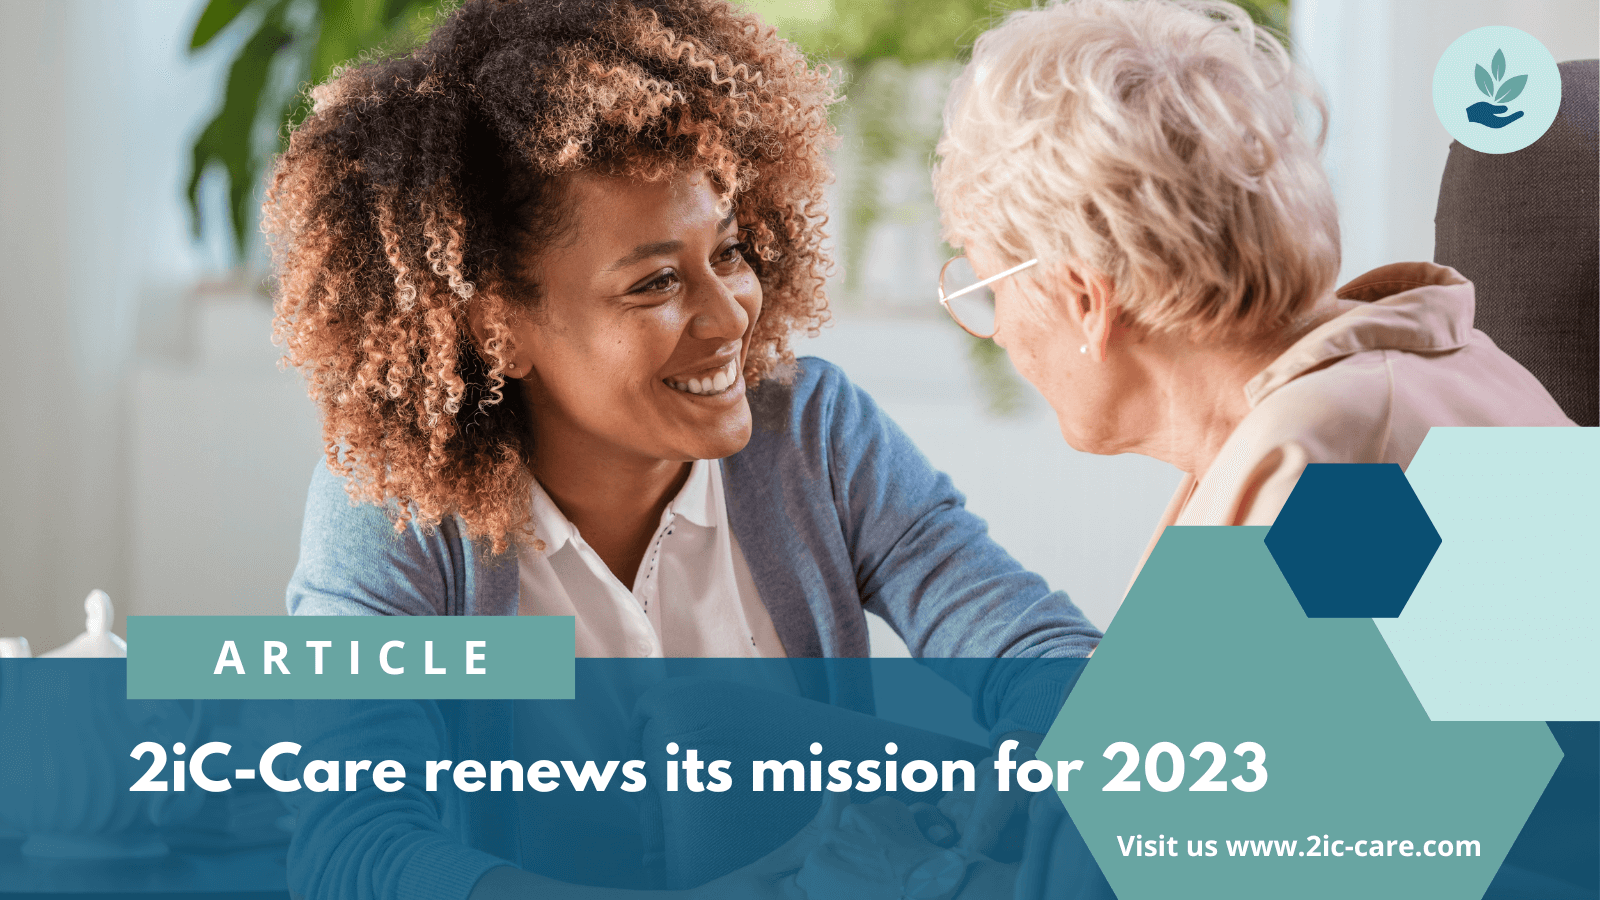 2iC-Care renews its mission for 2023.